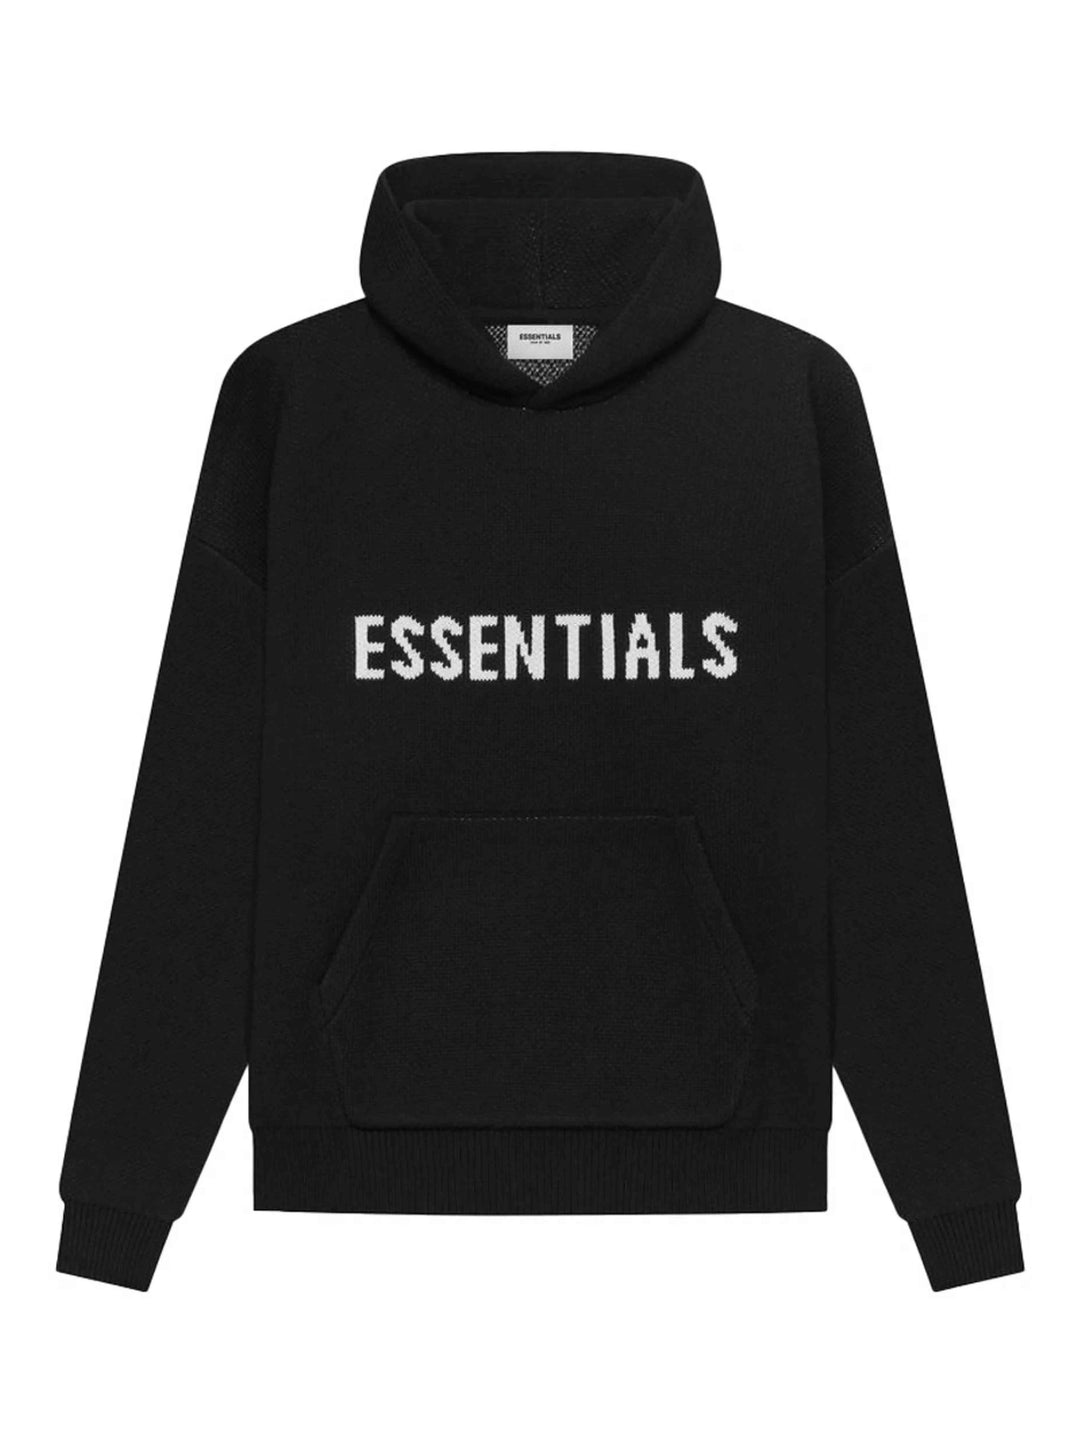 Fear Of God Essentials Knit Pullover Hoodie Black [SS21] Prior